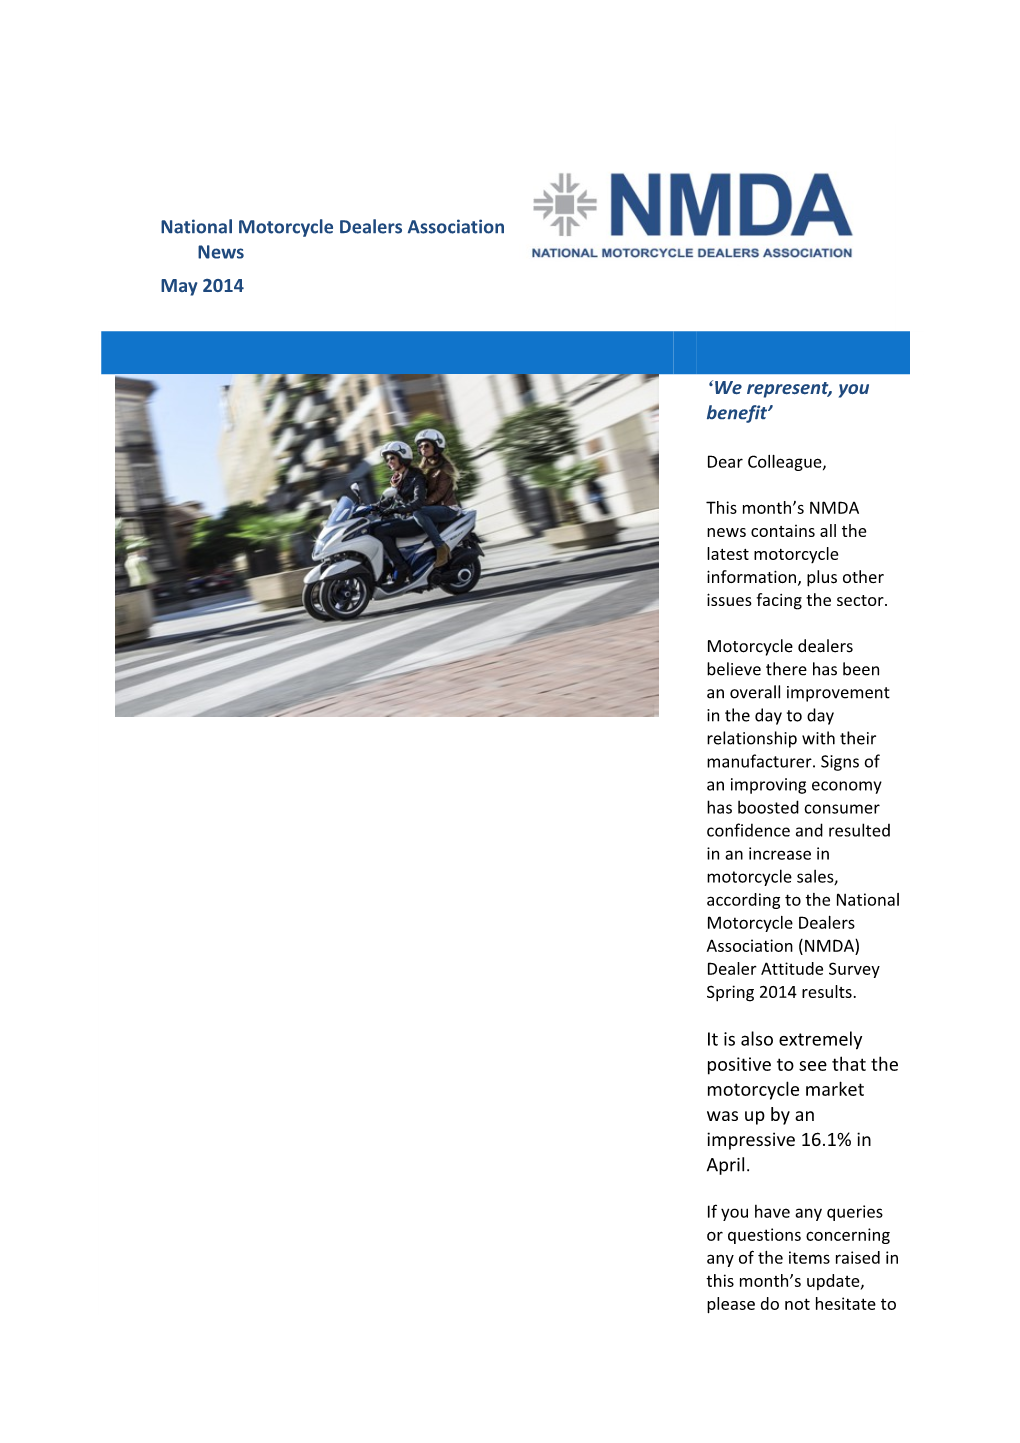 National Motorcycle Dealers Association News